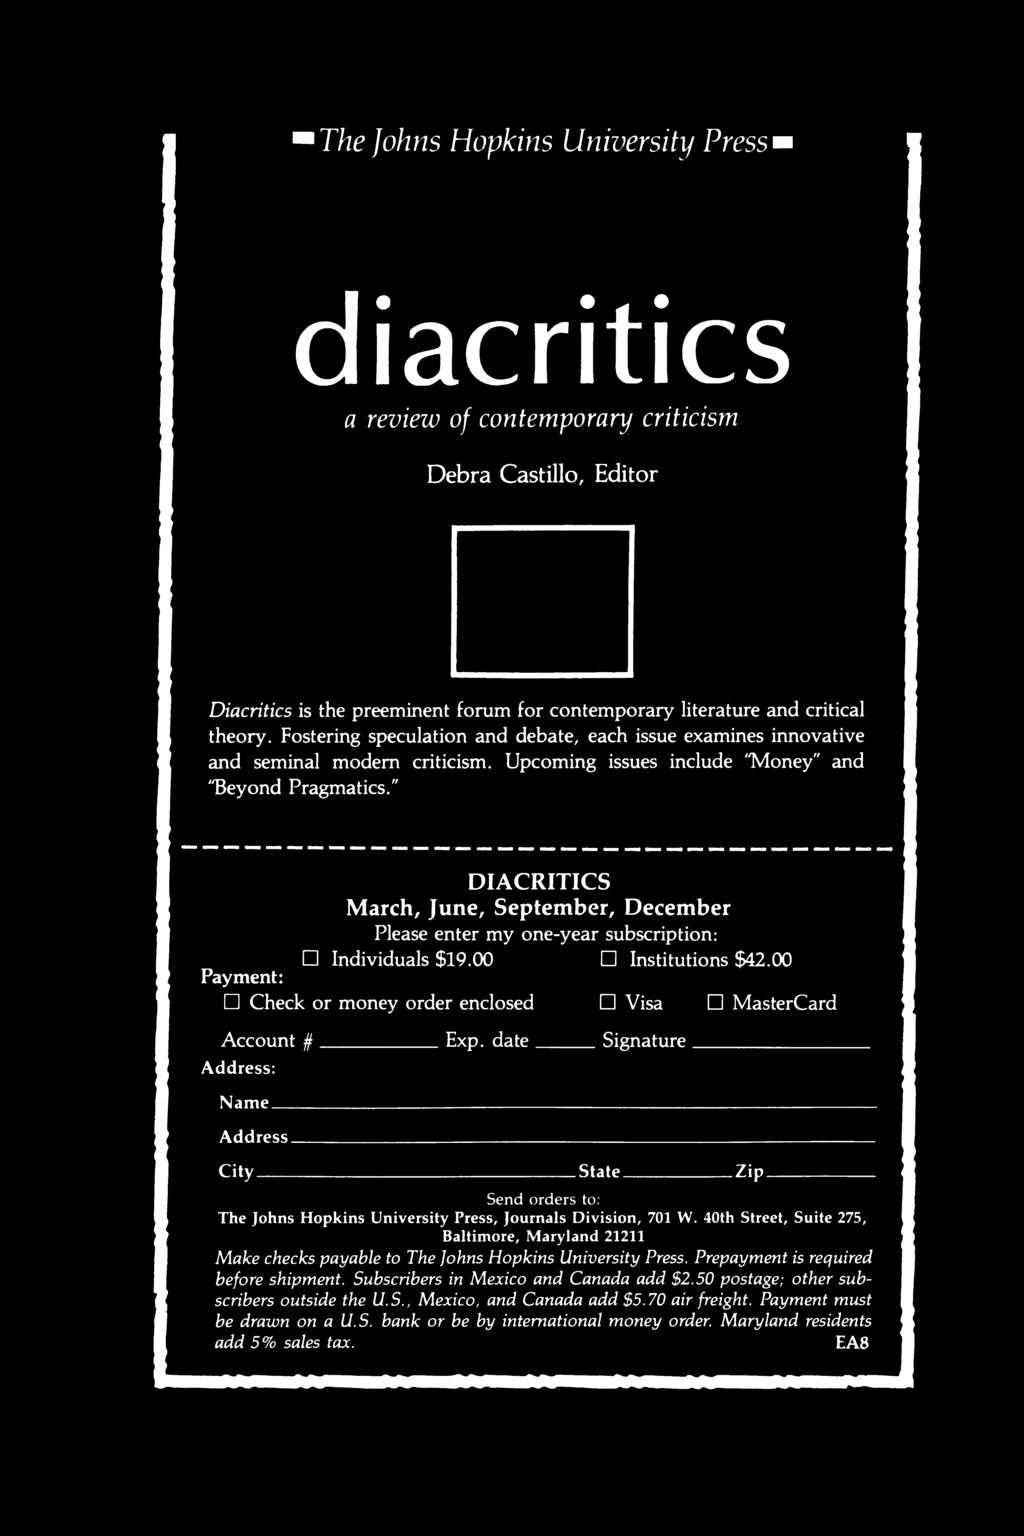 " DIACRITICS March, June, September, December Please enter my one-year subscription: Individuals $19.00 Institutions $42.00 Payment: Check or money order enclosed Visa MasterCard Account # Exp.